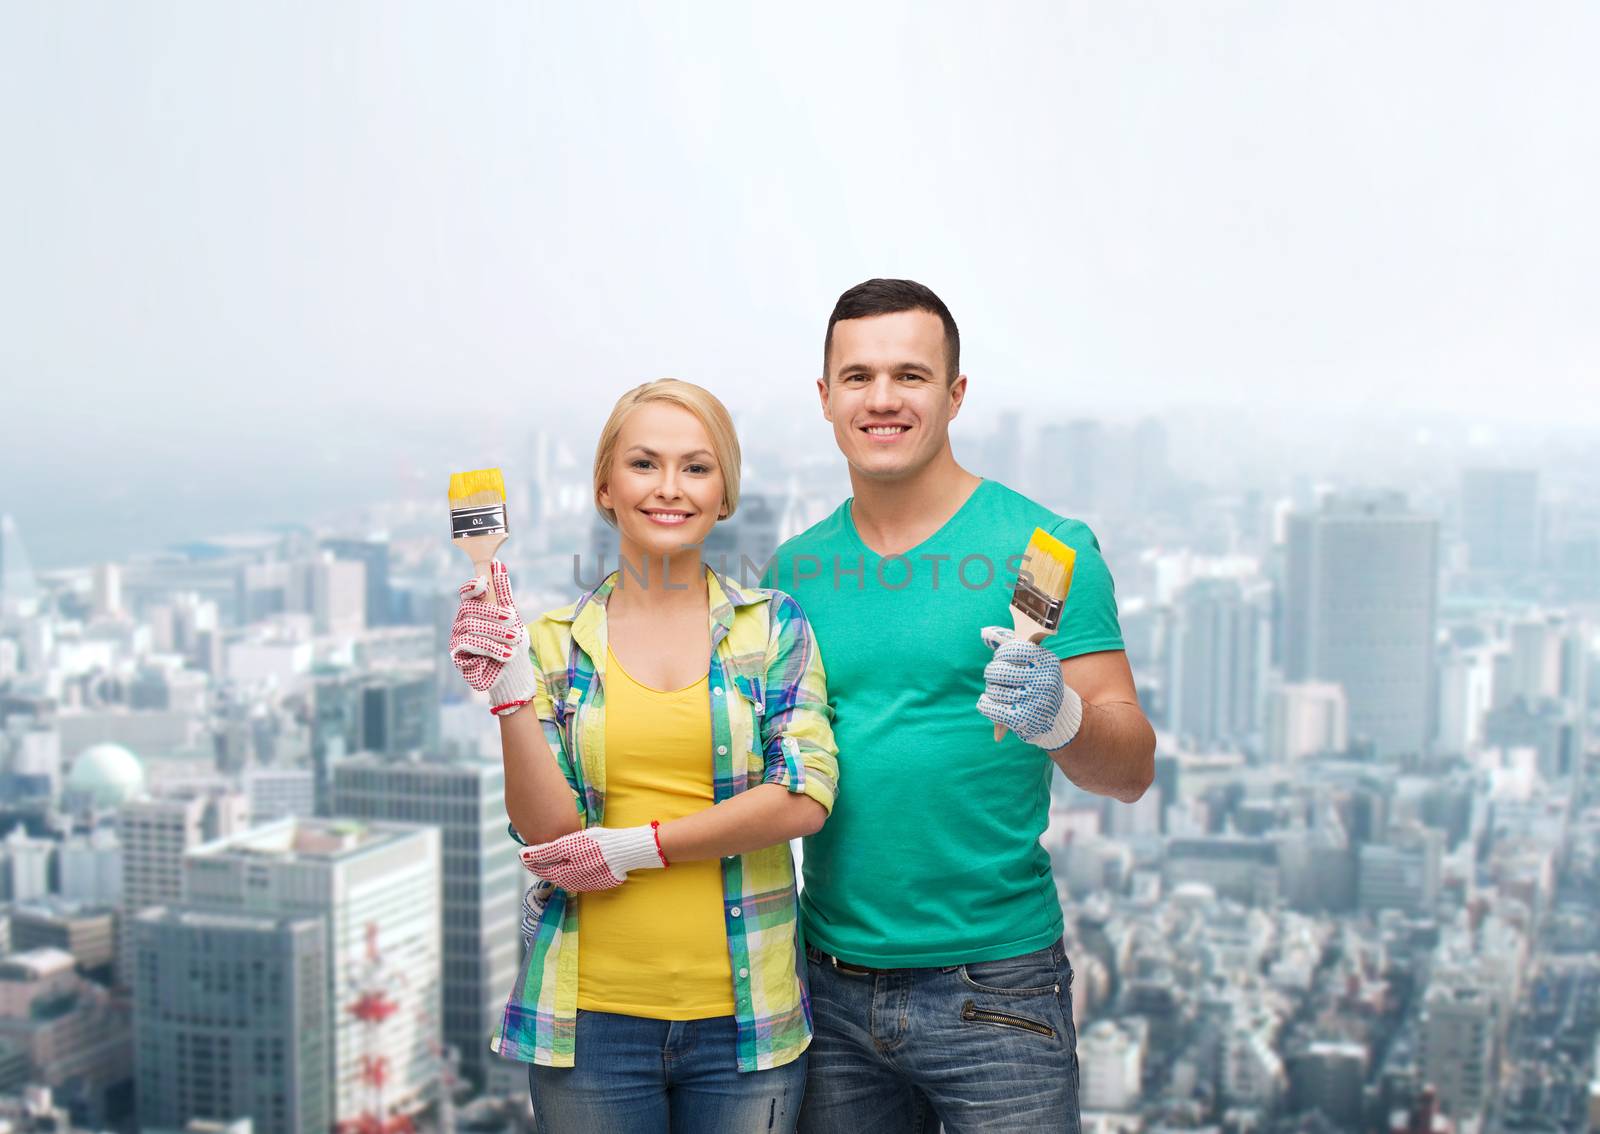 repair, construction and maintenance concept - smiling couple with paintbrush